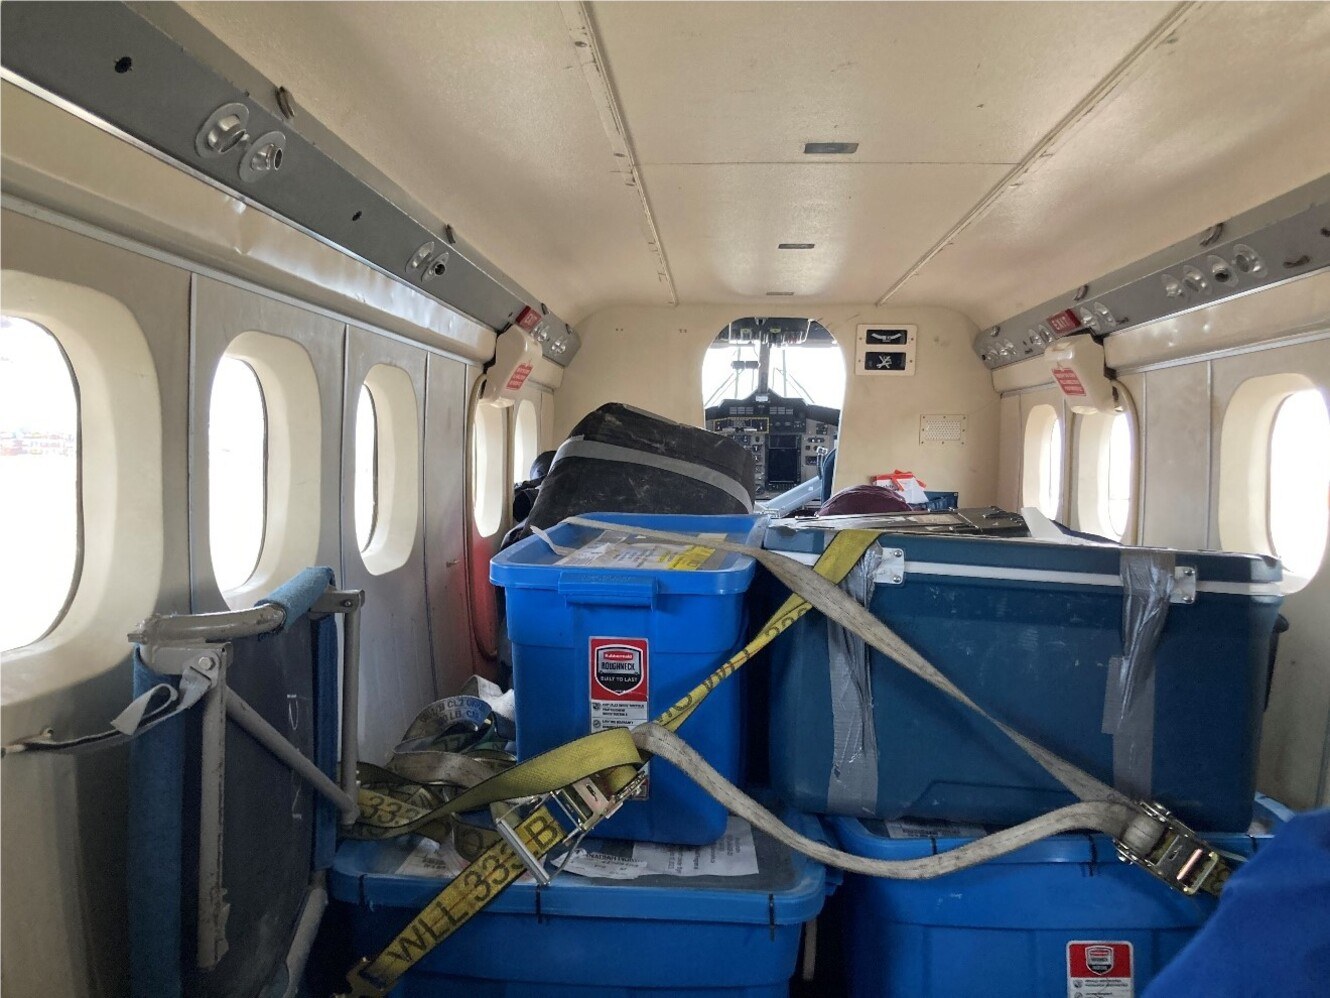 Twin Otter interior with luggage